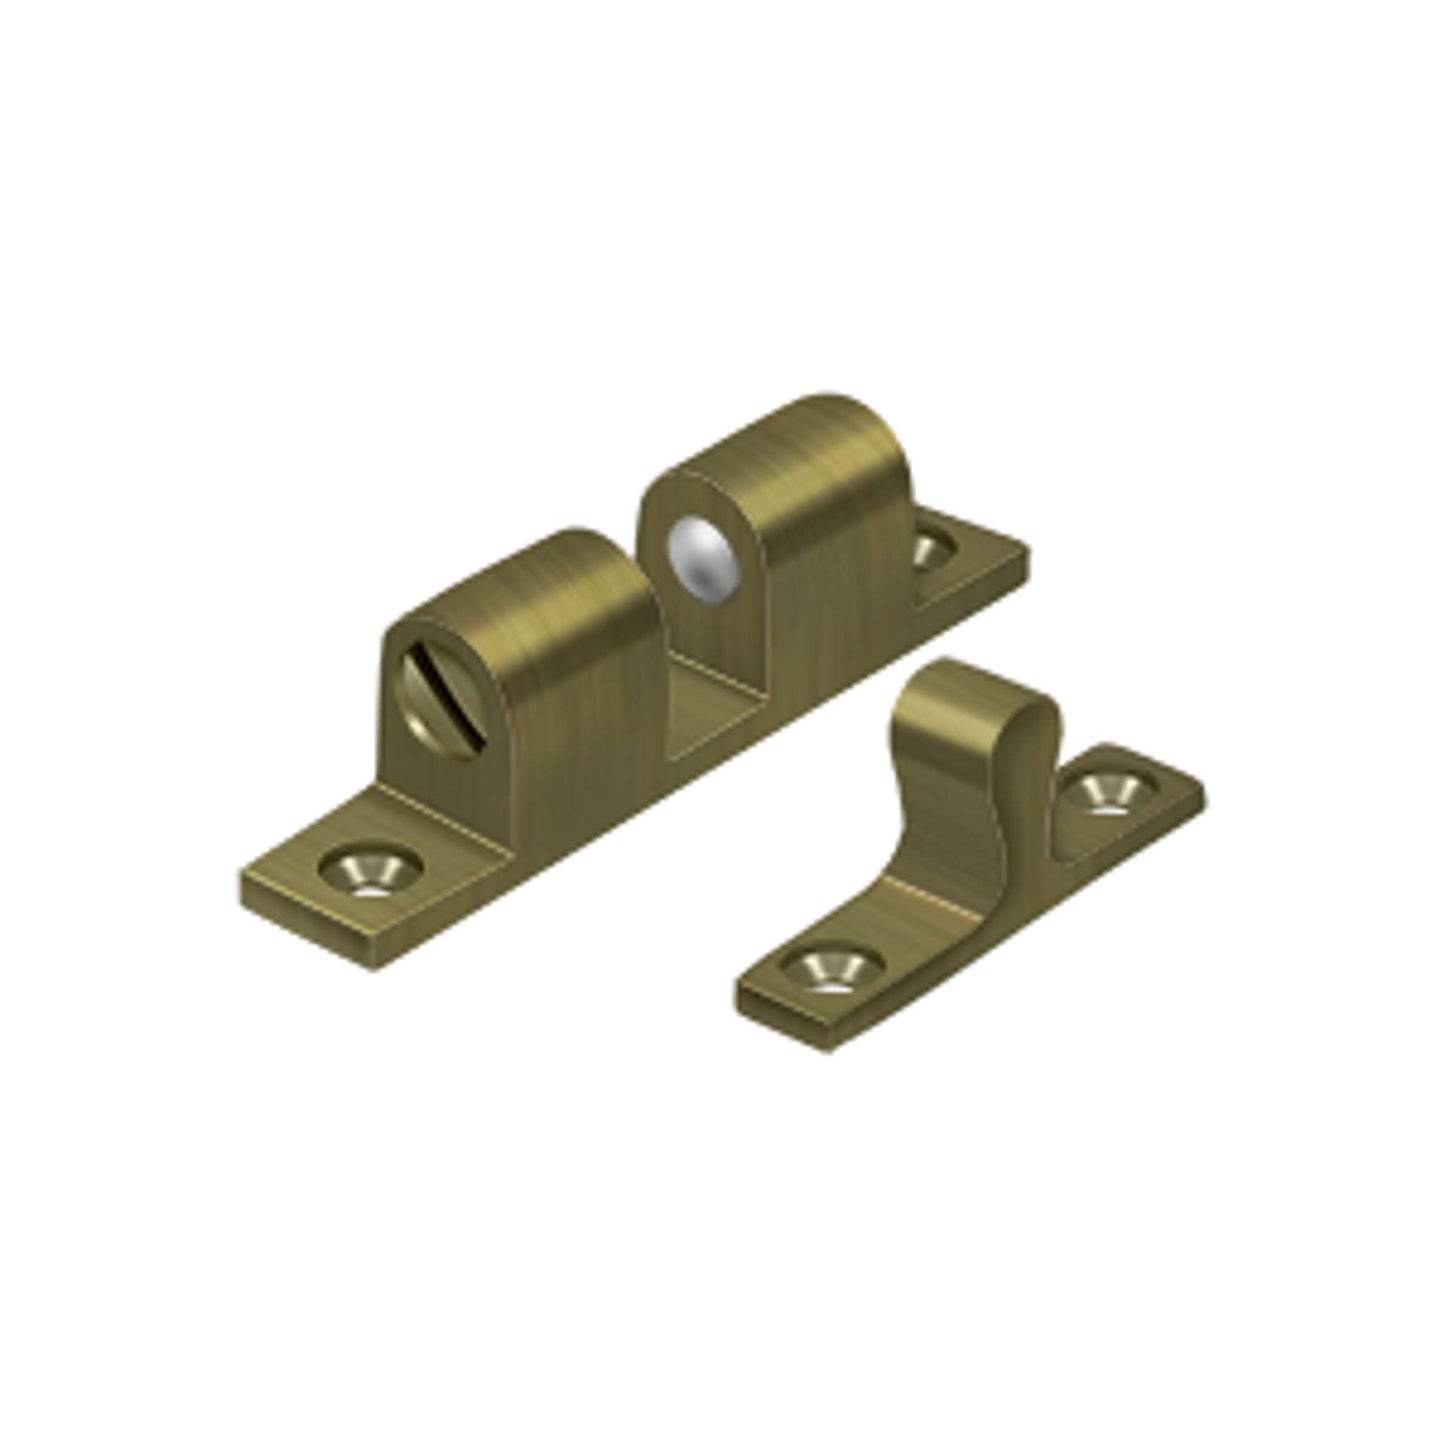 Deltana - Ball Tension Catch 2-1/4" x 1/2"